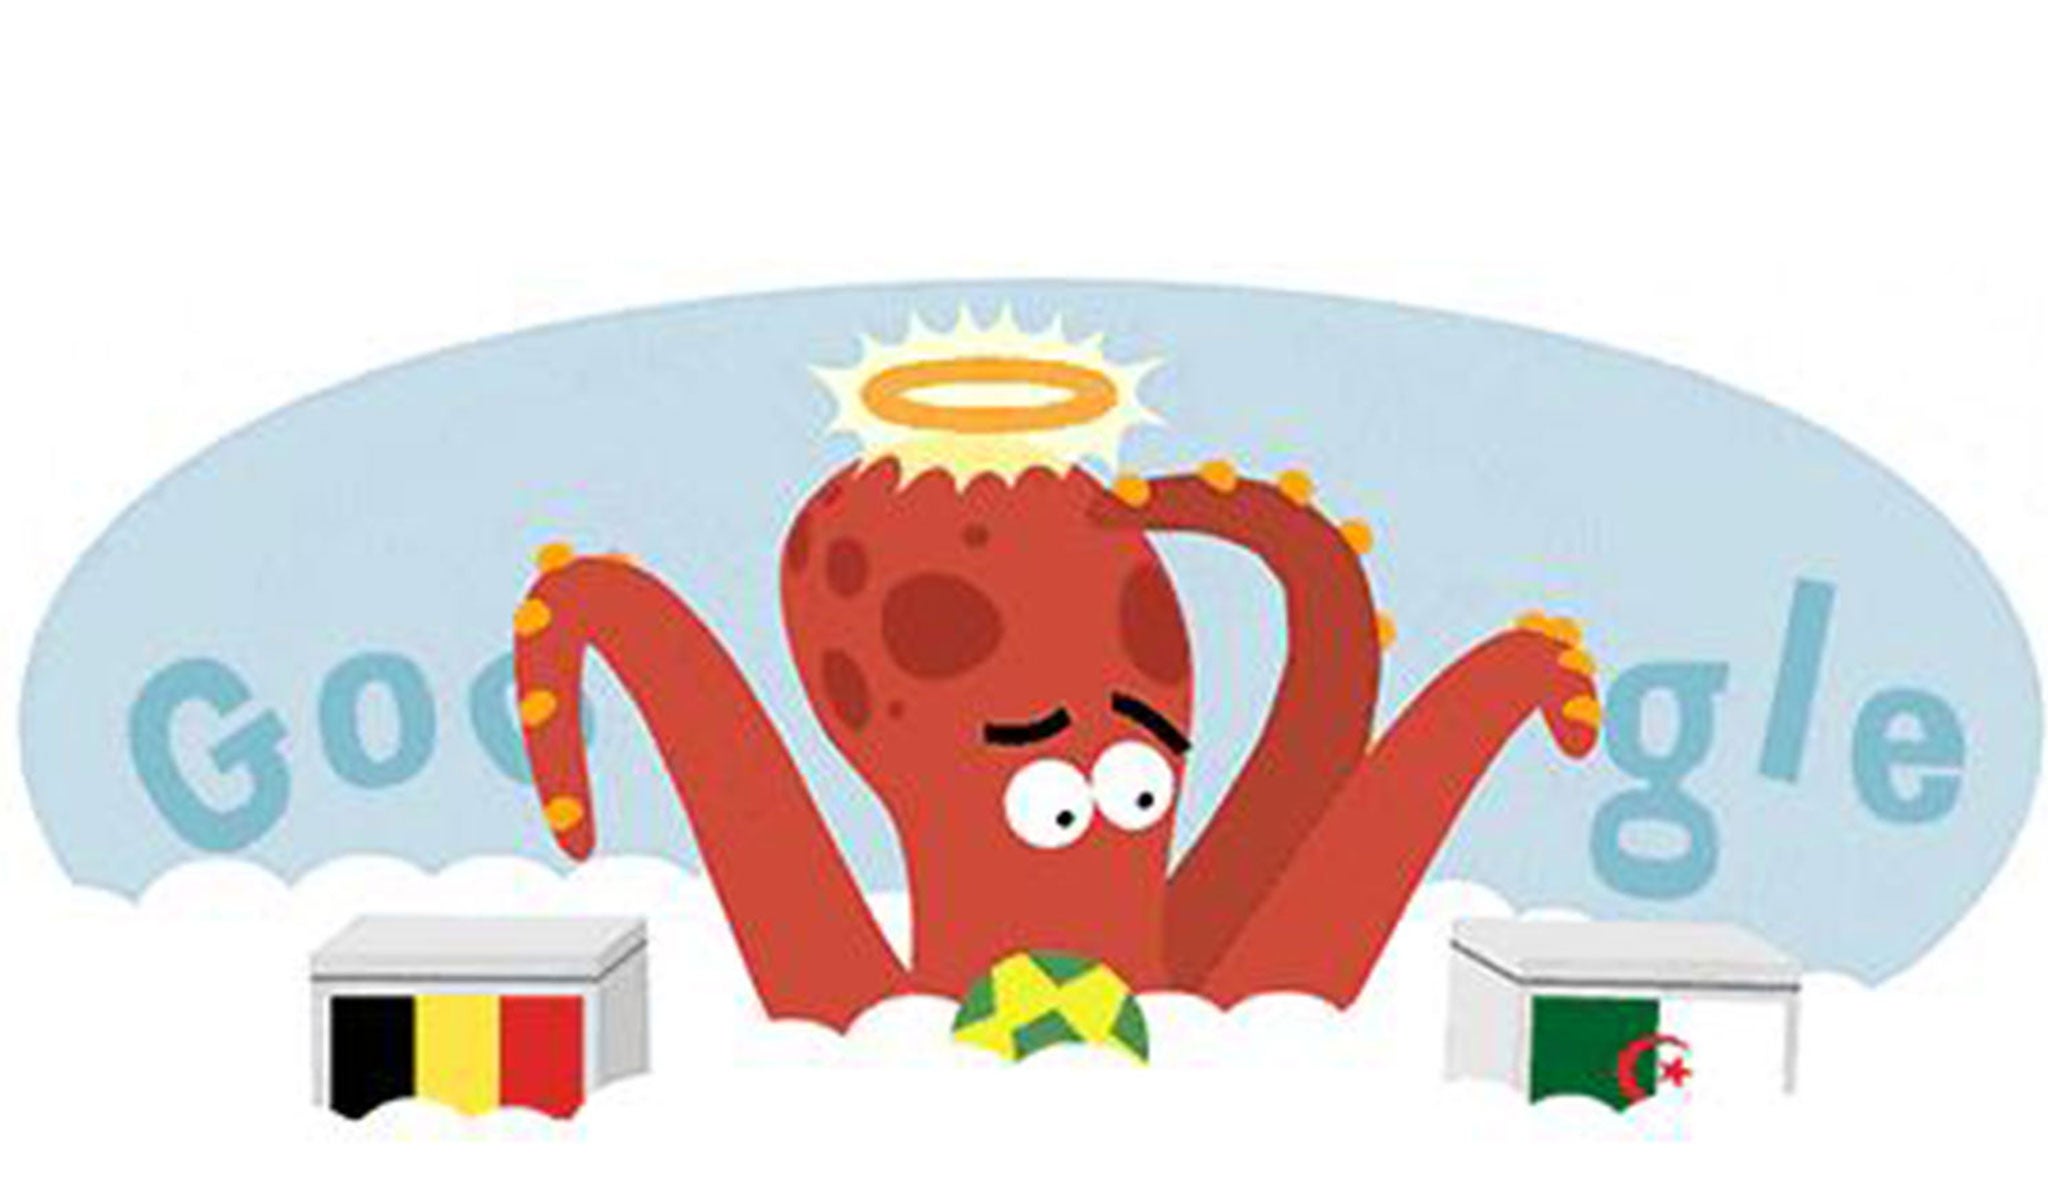 17 June 2014: Google celebrates the 2014 World Cup match between Belgium vs Algeria with a doodle honouring Paul the Octopus